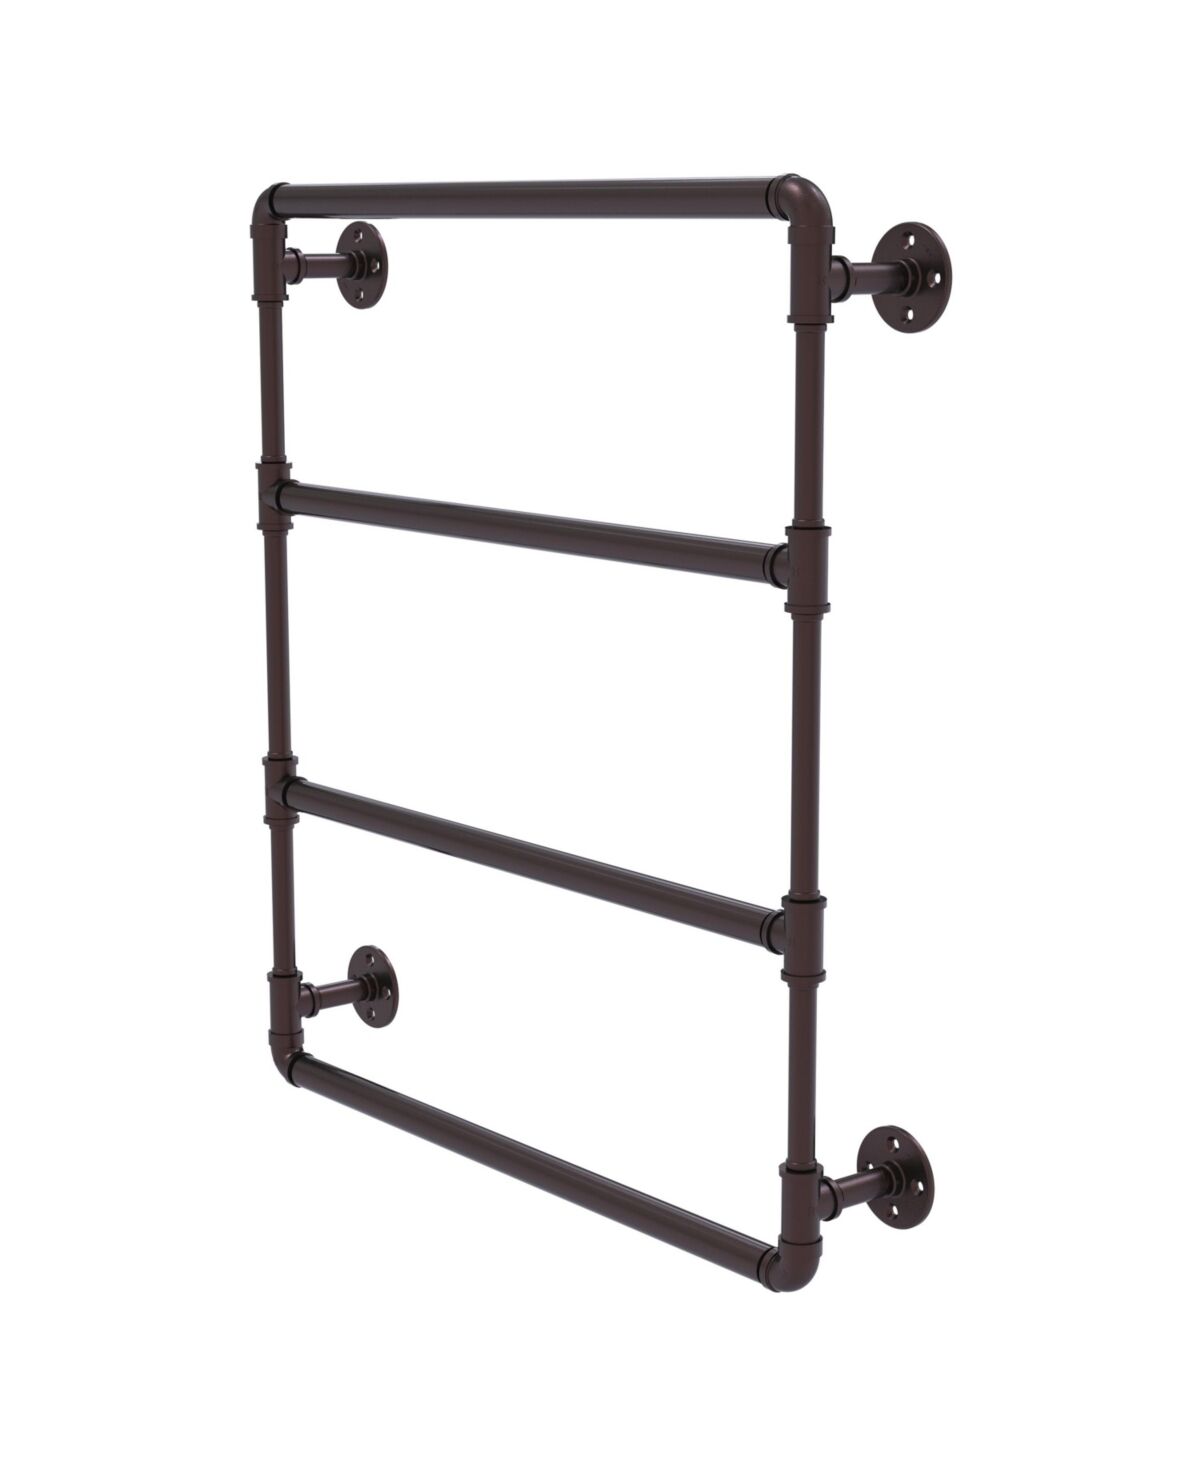 Allied Pipeline Collection 30 Inch Wall Mounted Ladder Towel Bar - Antique bronze